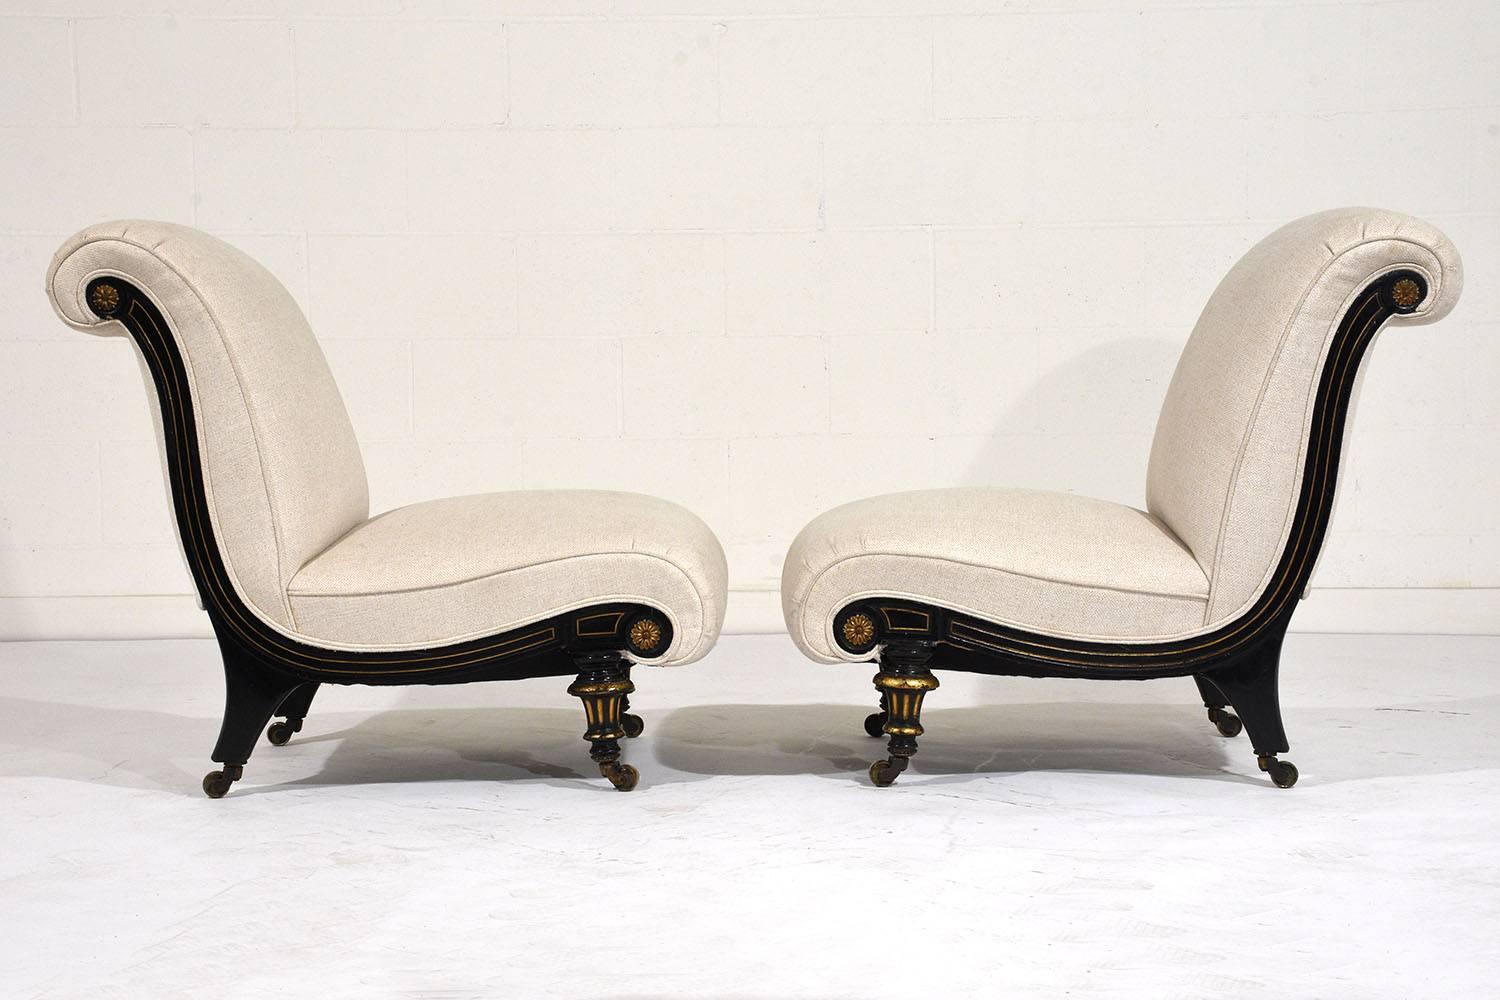 Carved Pair of French Regency-Style Ebonized Slipper Chairs